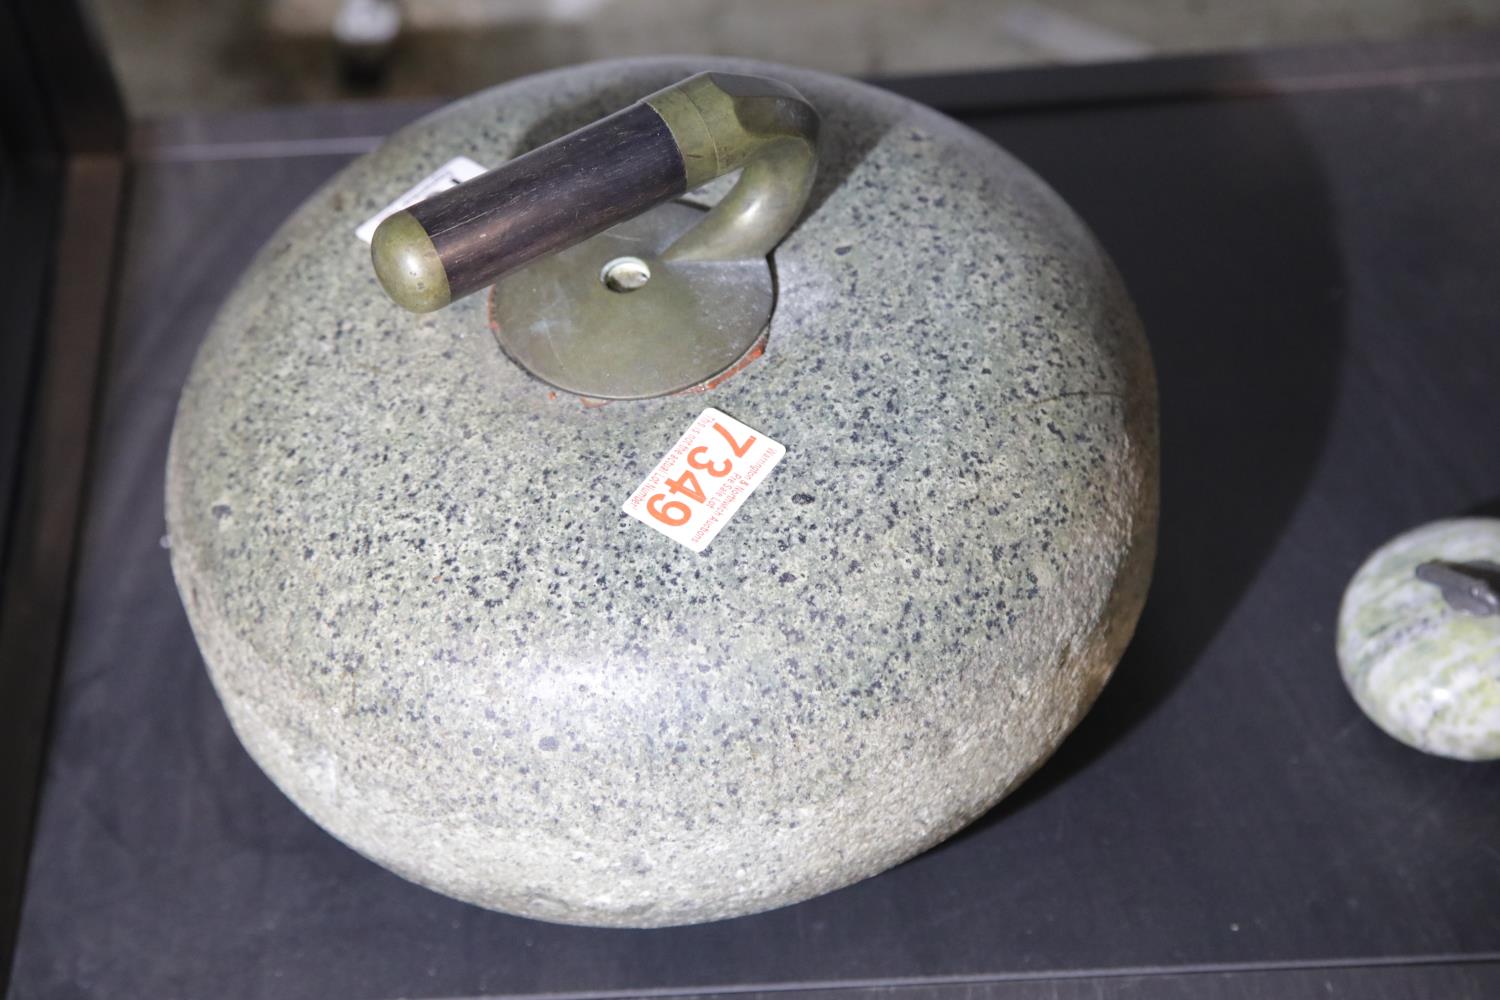 Vintage Ailsa Craig granite curling stone and a granite curling stone paperweight. Not available for